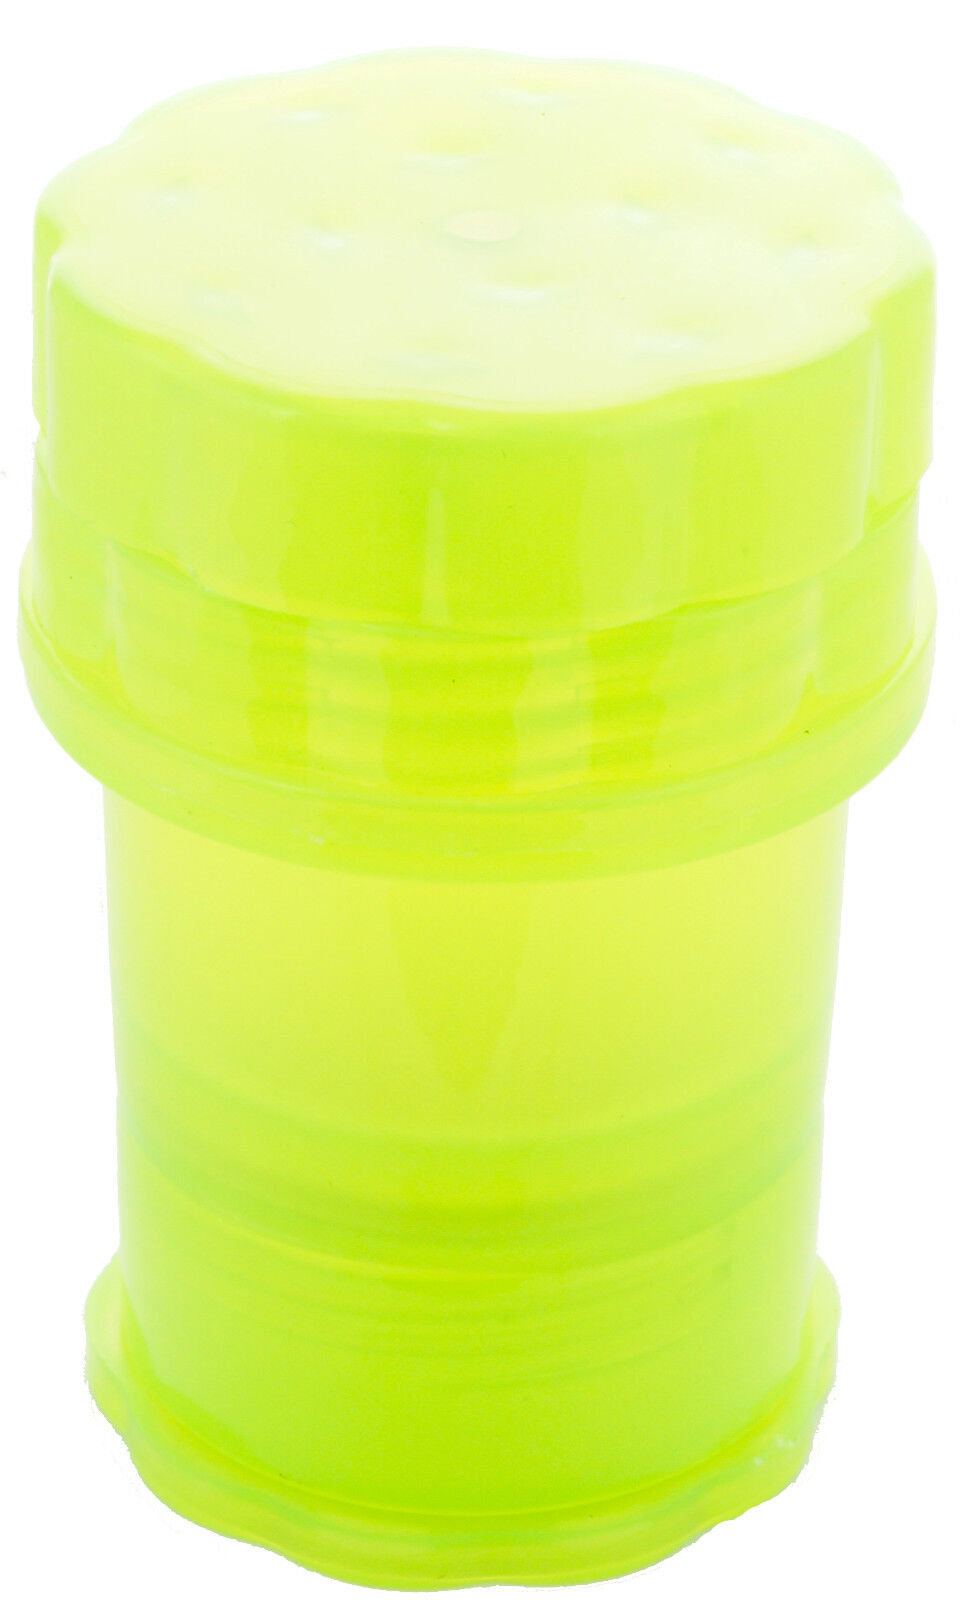 GRINDER herb saver container medtainer *HIGH QUALITY* # large size # Candy Color